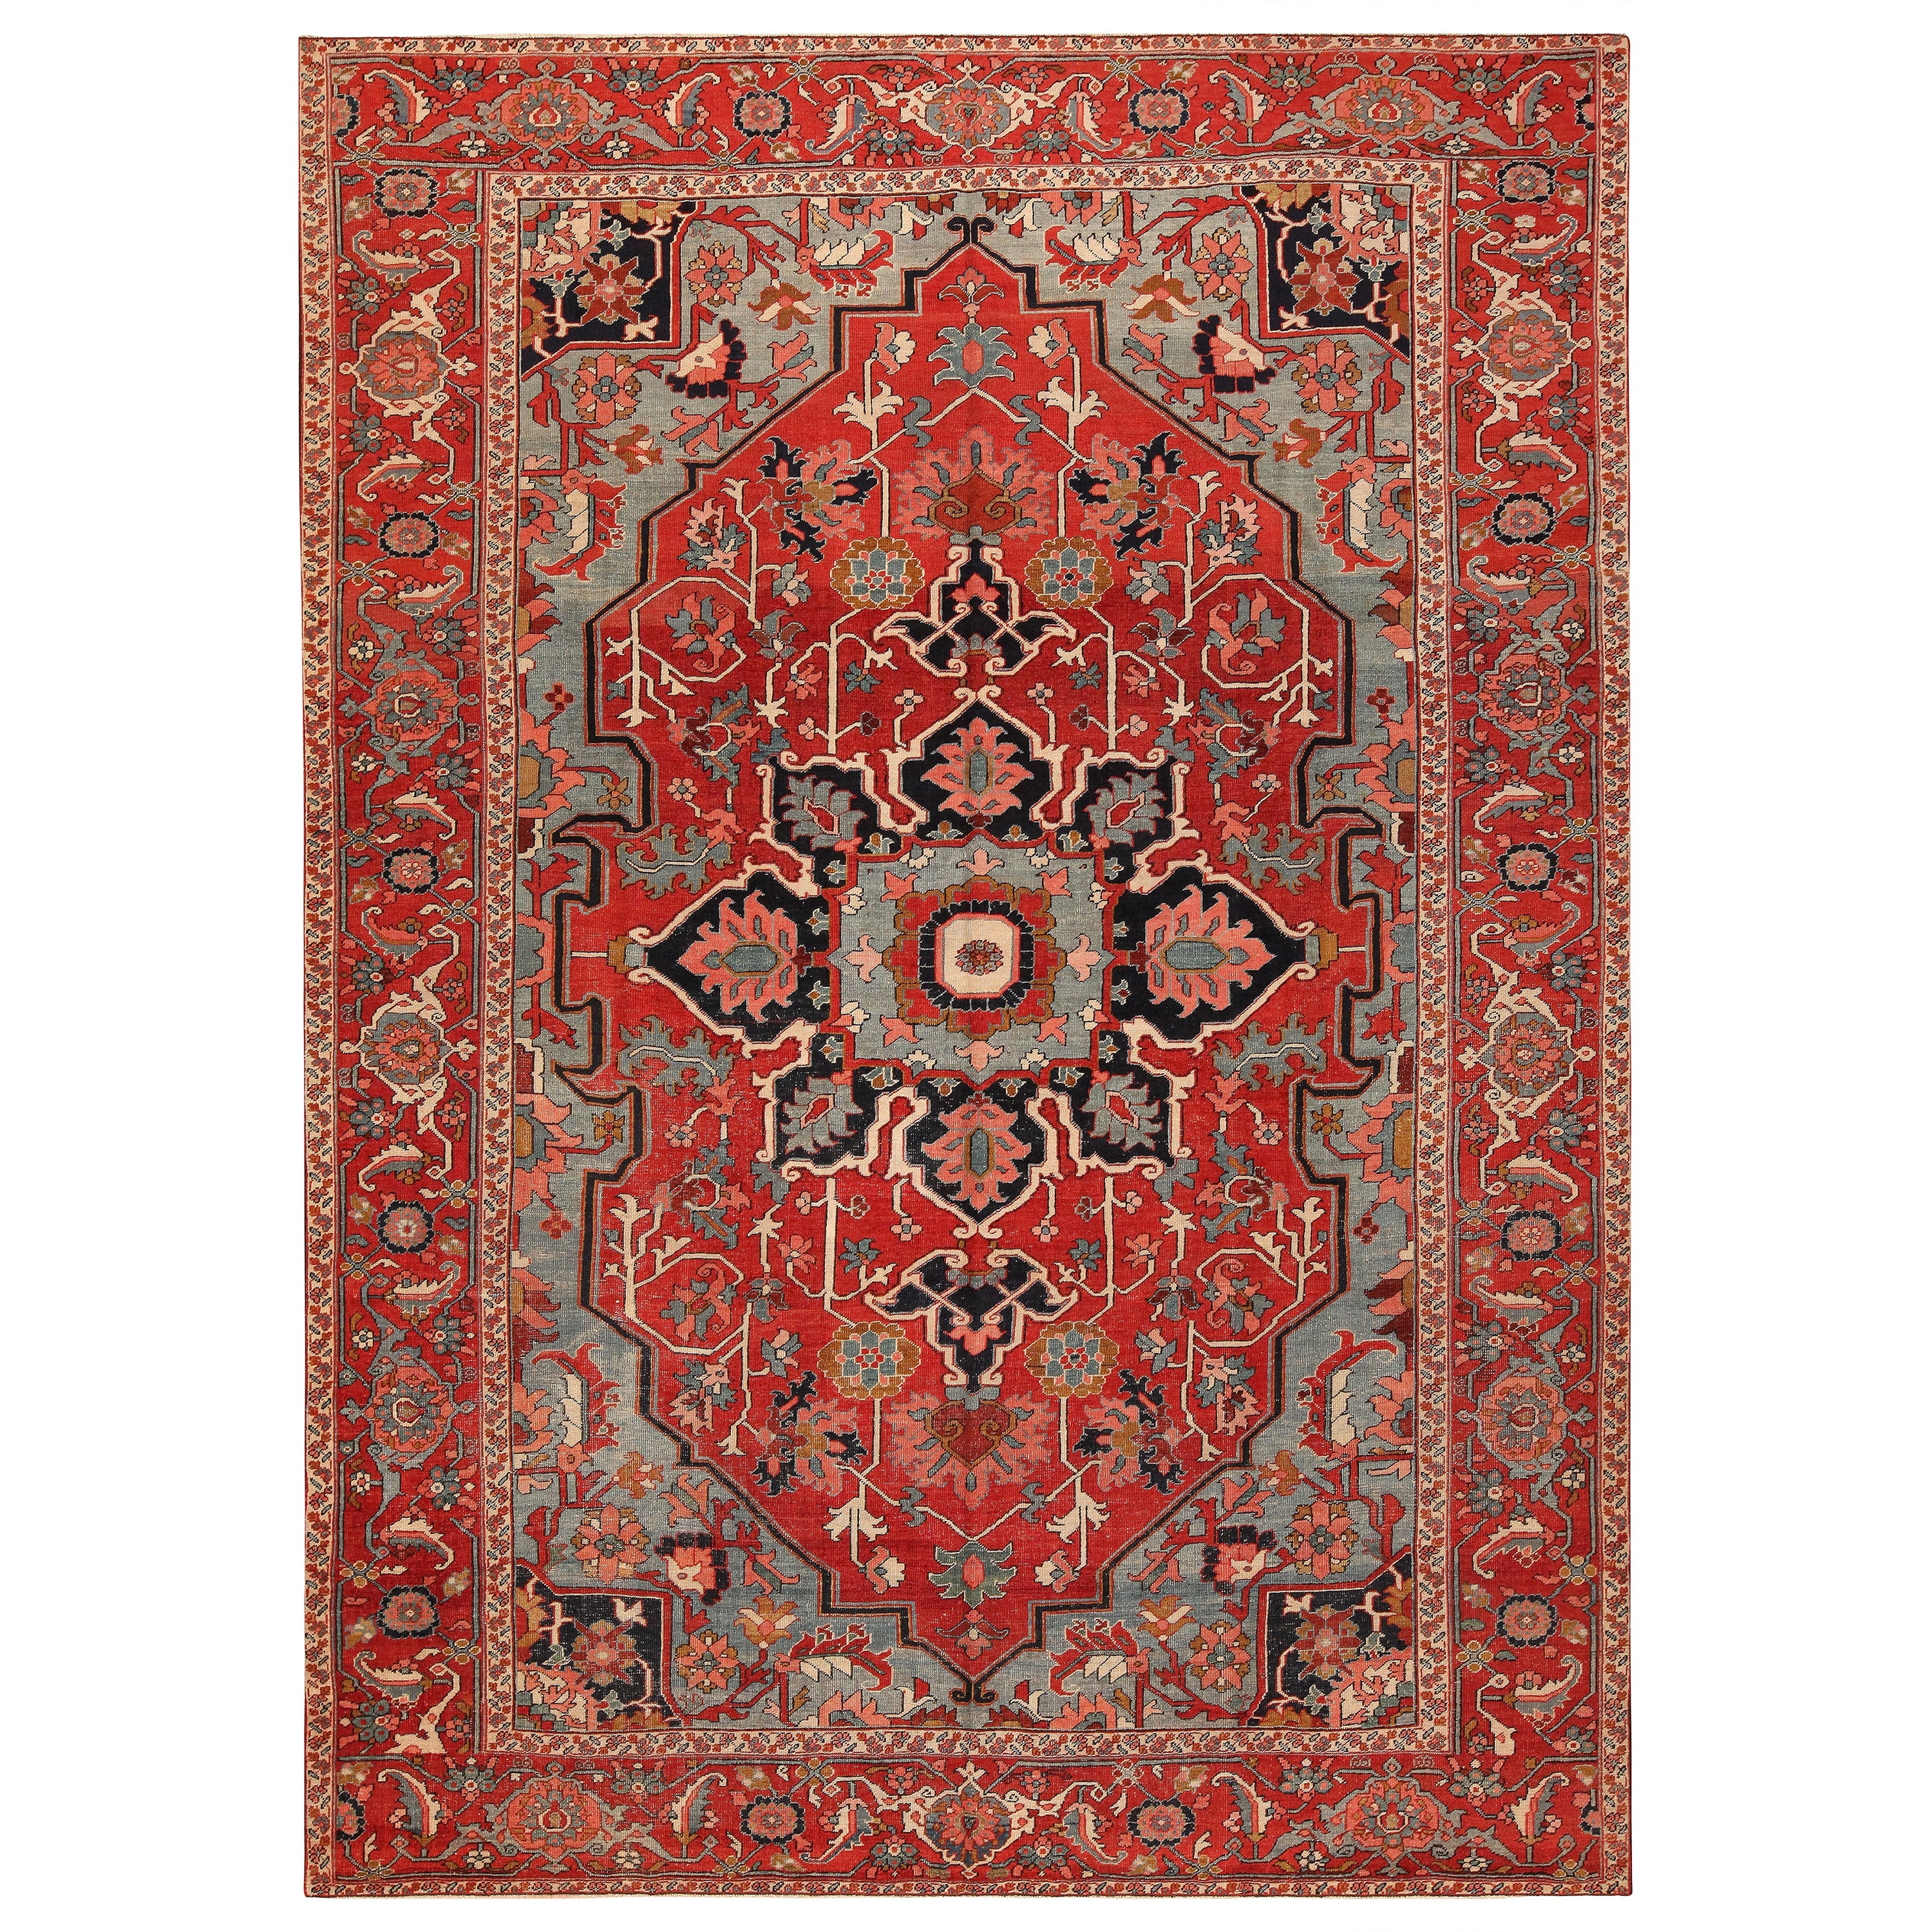 Antique Persian Serapi Rug. Size: 8 ft 9 in x 12 ft 2 in